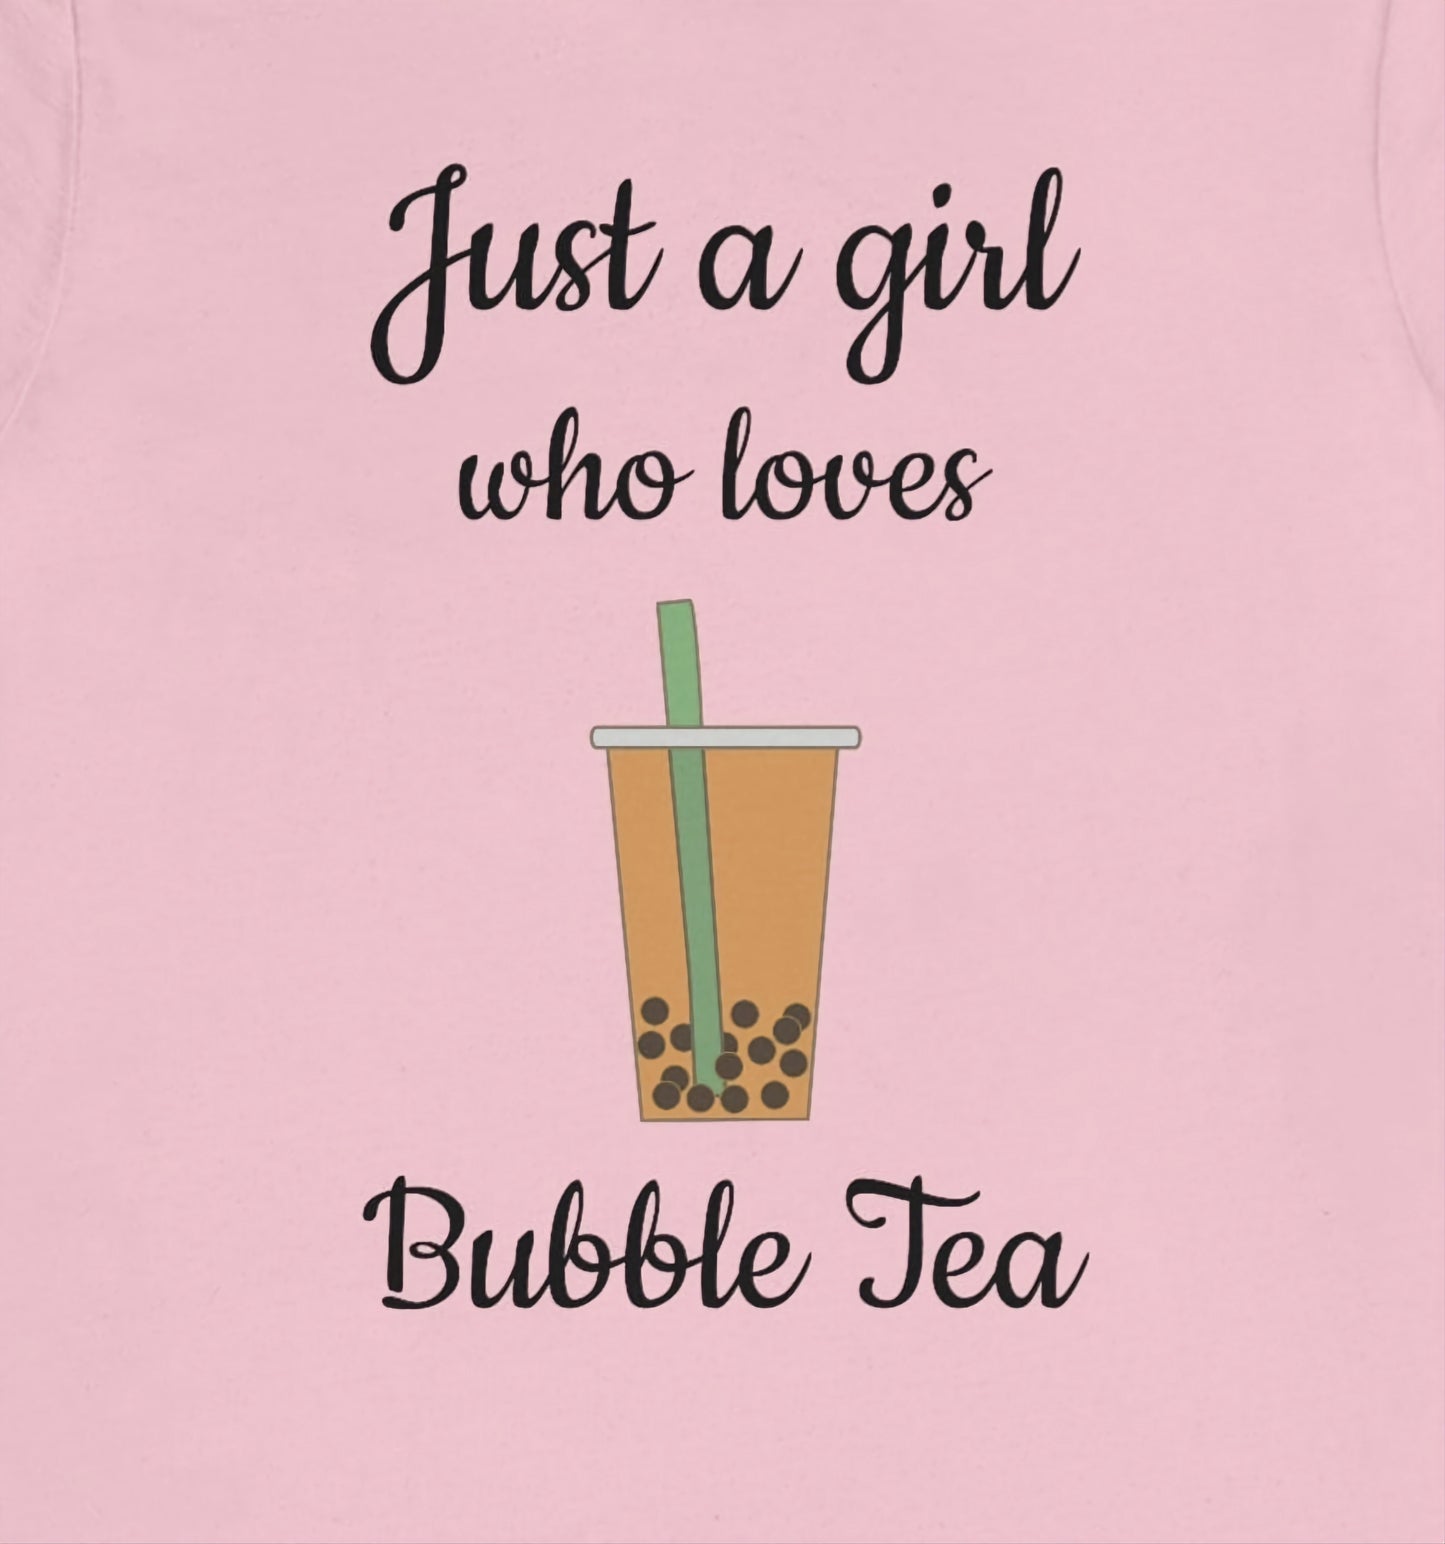 Just a girl who loves bubble tea - Designed - Unisex Short Sleeve Tee - CrazyTomTShirts